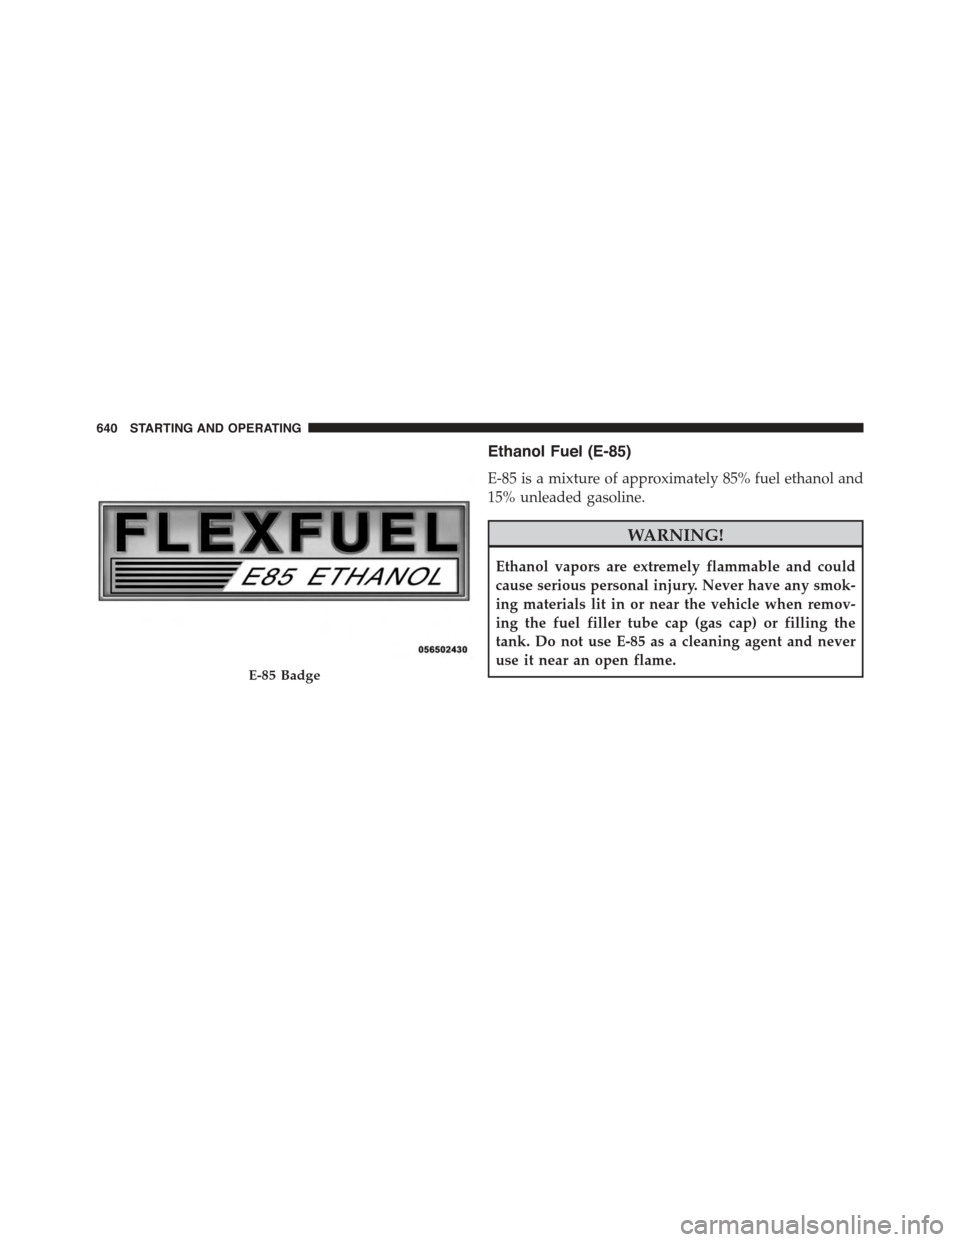 Ram 1500 2015  Owners Manual Ethanol Fuel (E-85)
E-85 is a mixture of approximately 85% fuel ethanol and
15% unleaded gasoline.
WARNING!
Ethanol vapors are extremely flammable and could
cause serious personal injury. Never have a